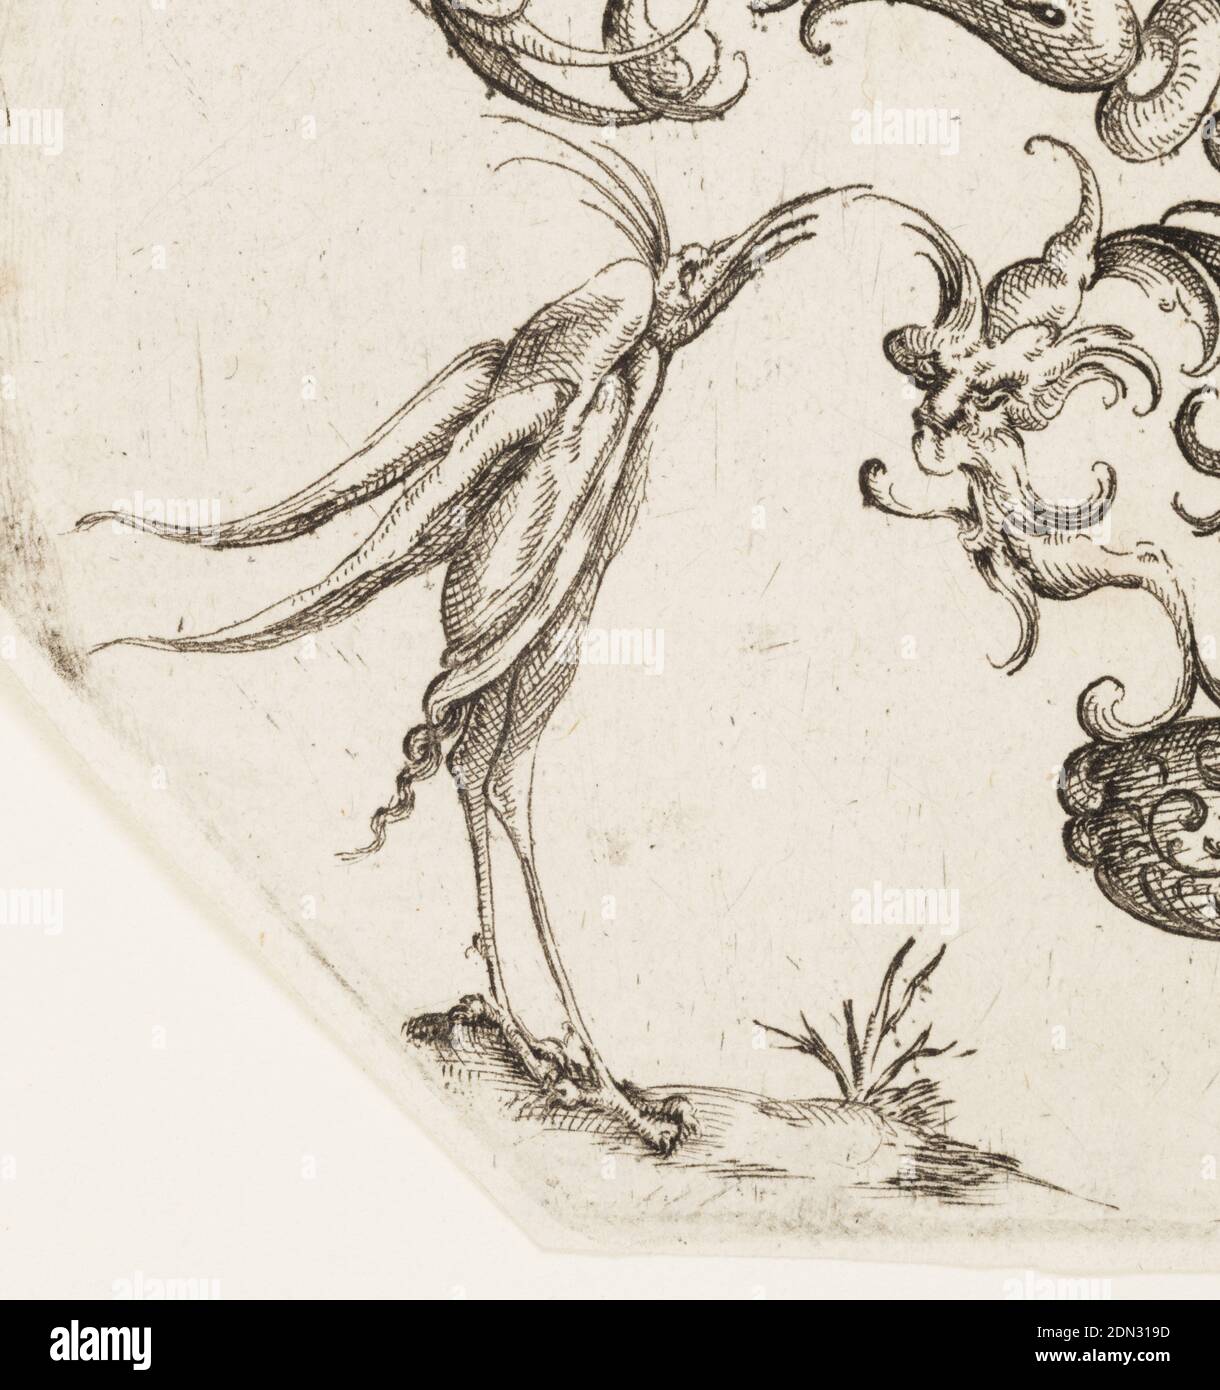 Plate 1, from Die Folge der phantastichen Scmucksträße (Suite of Fantastic Ornamental Bouquets), Wendel Dietterlin the Younger, German, active 1610–1614, Etching on laid paper, Octagonal print showing a nosegay plant; two grotesque head-monsters flank the bottom of the plant; symmetrical arabesque motif with creatures., Germany, 1614, ornament, Print Stock Photo